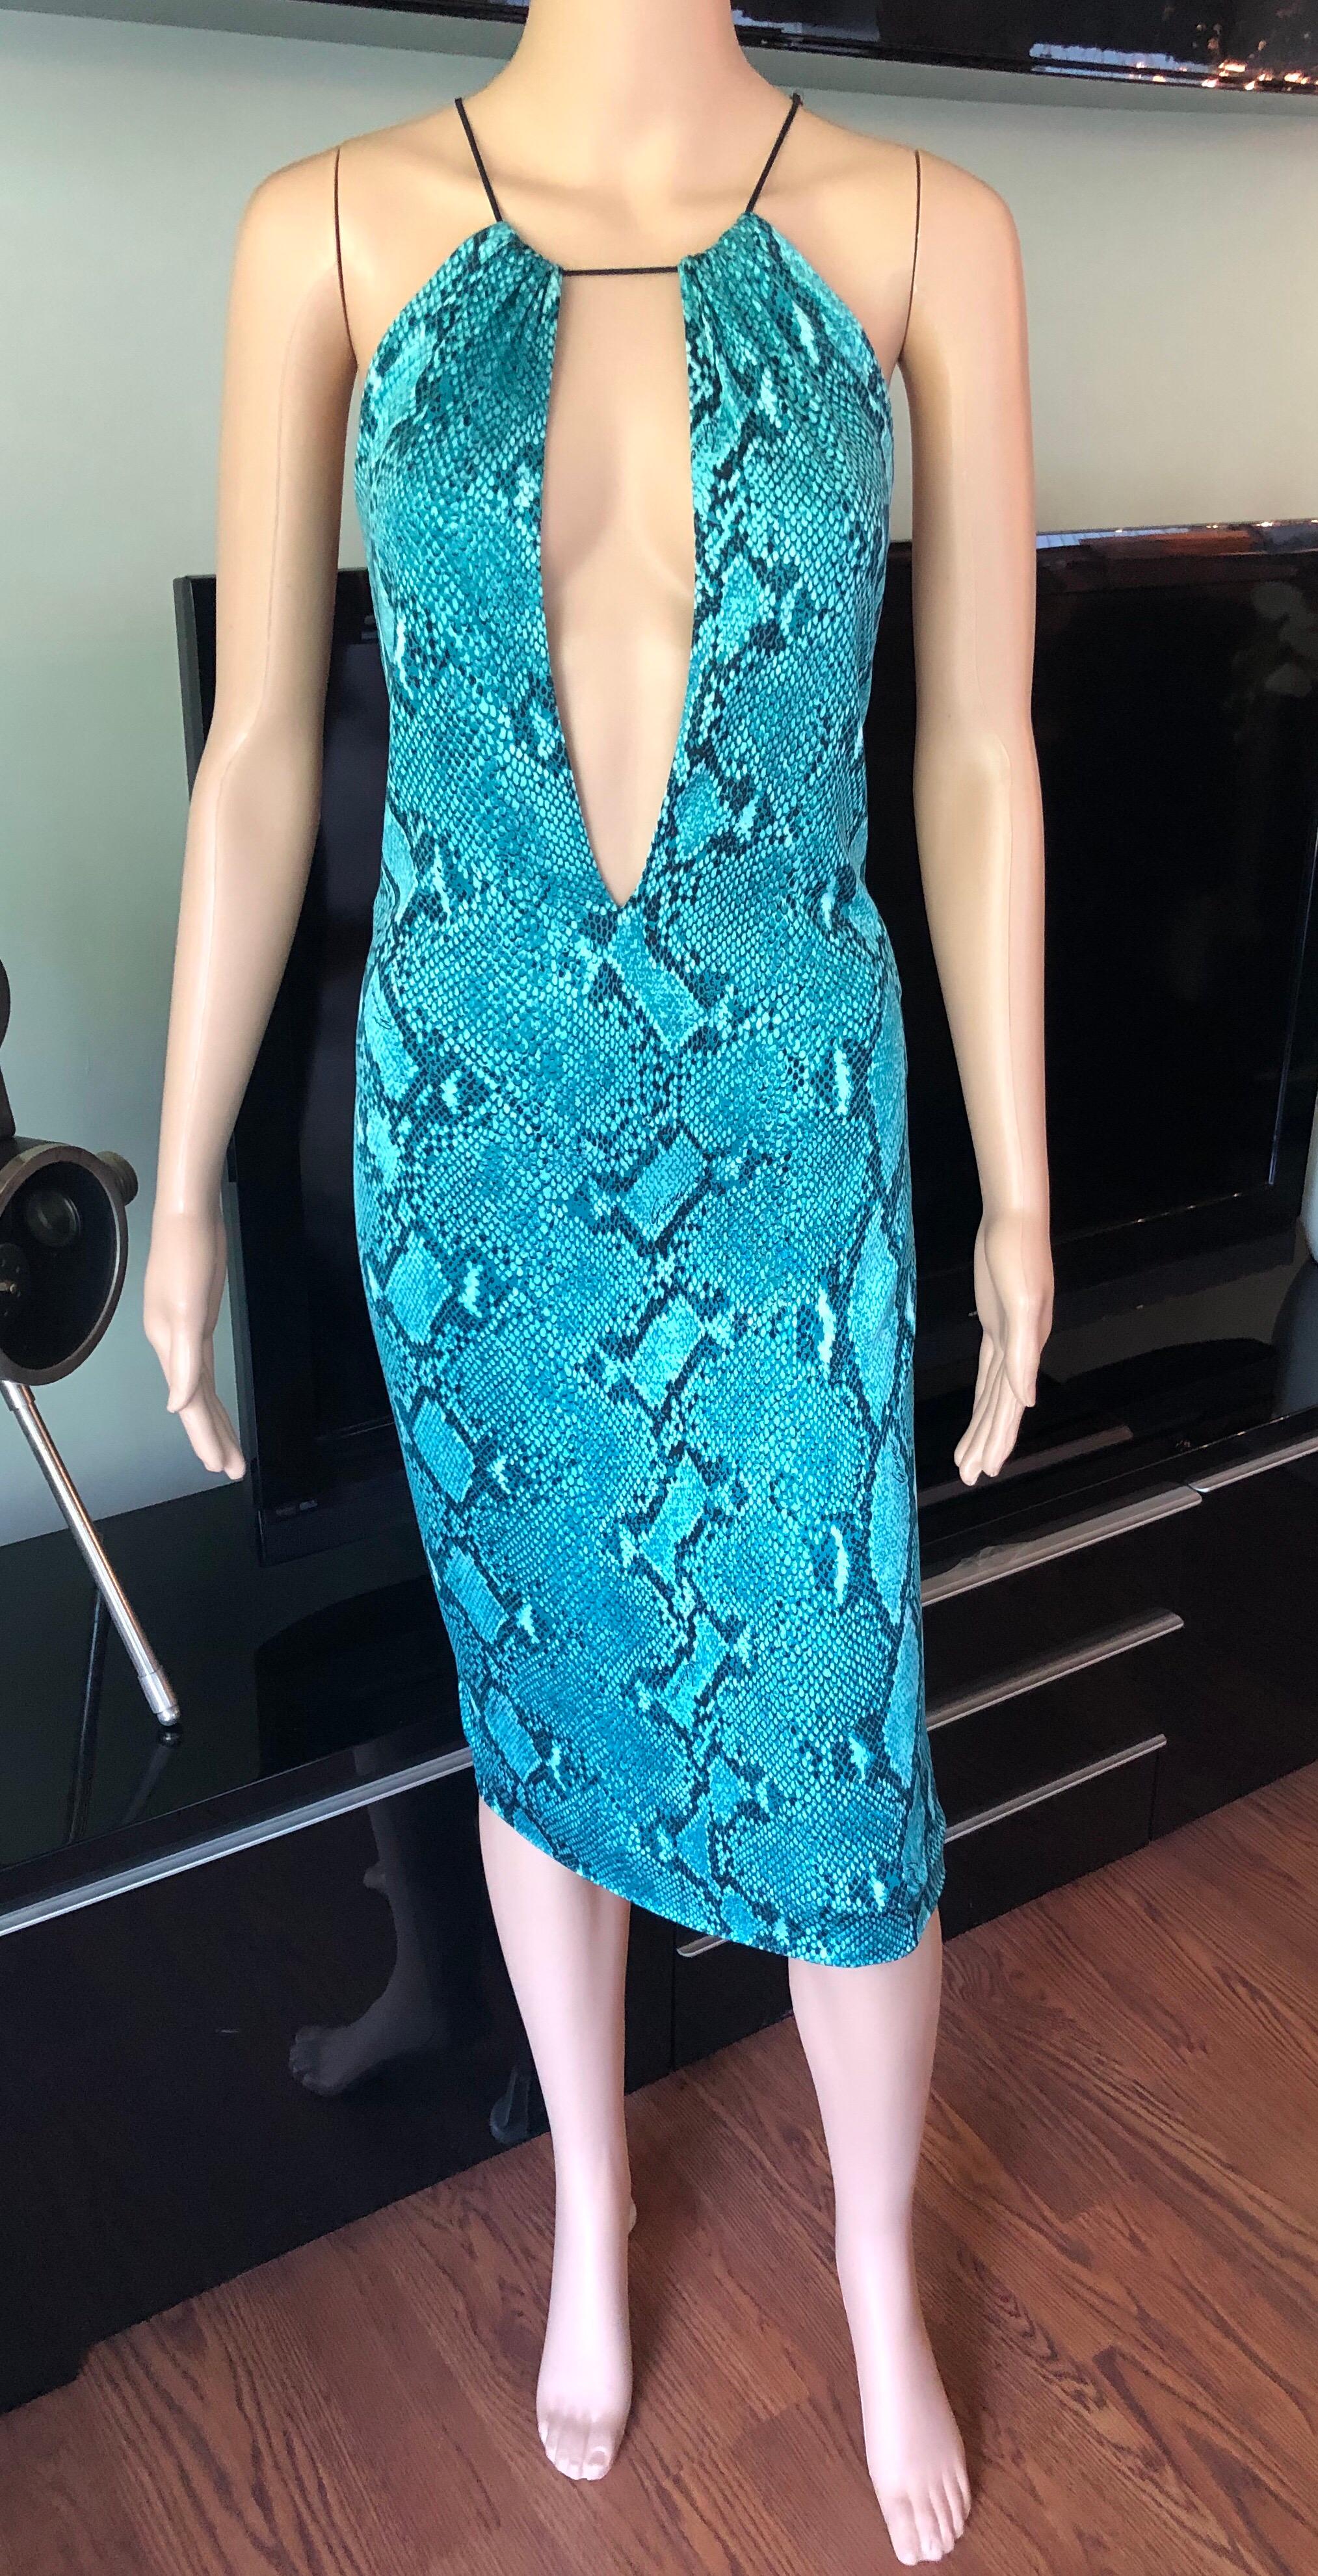 Tom Ford for Gucci S/S 2000 Runway Campaign Python Print Plunged Halter Dress IT 38

Gucci midi dress featuring python print throughout, halter neck with cutout and push lock metal clasp closure at shoulders. 